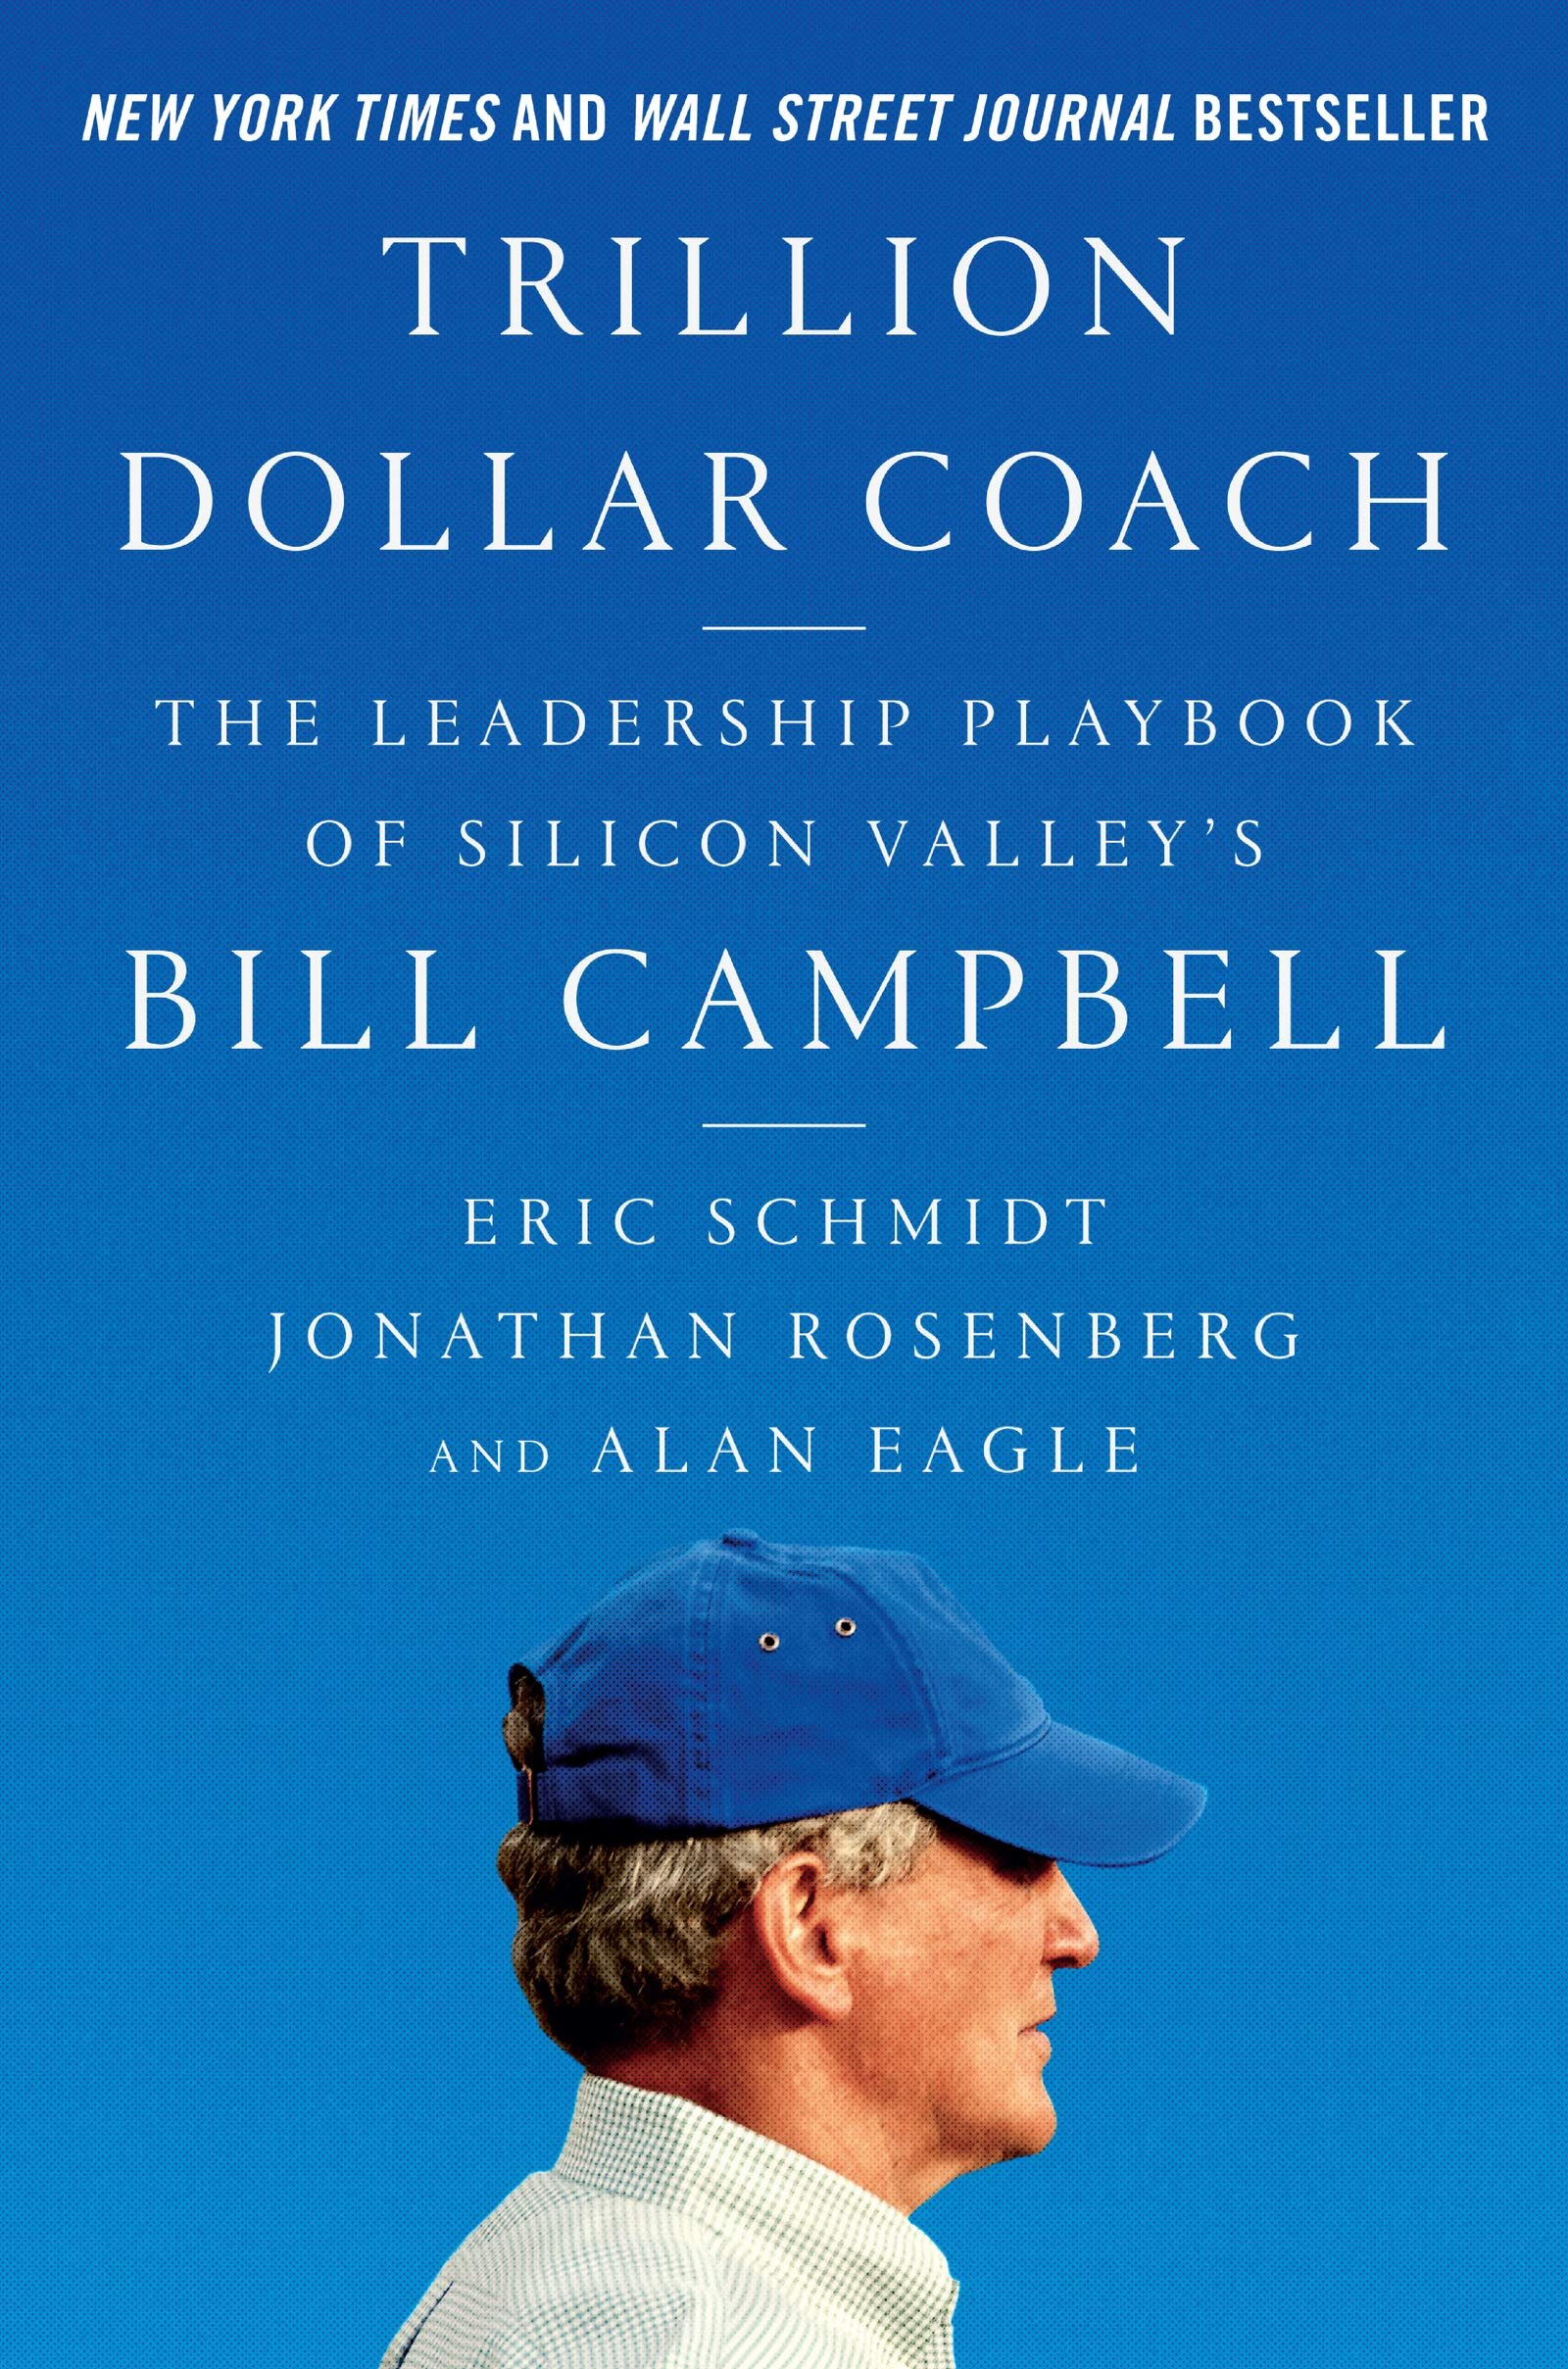 Trillion Dollar Coach: The Leadership Playbook of Silicon Valley's Bill Campbel